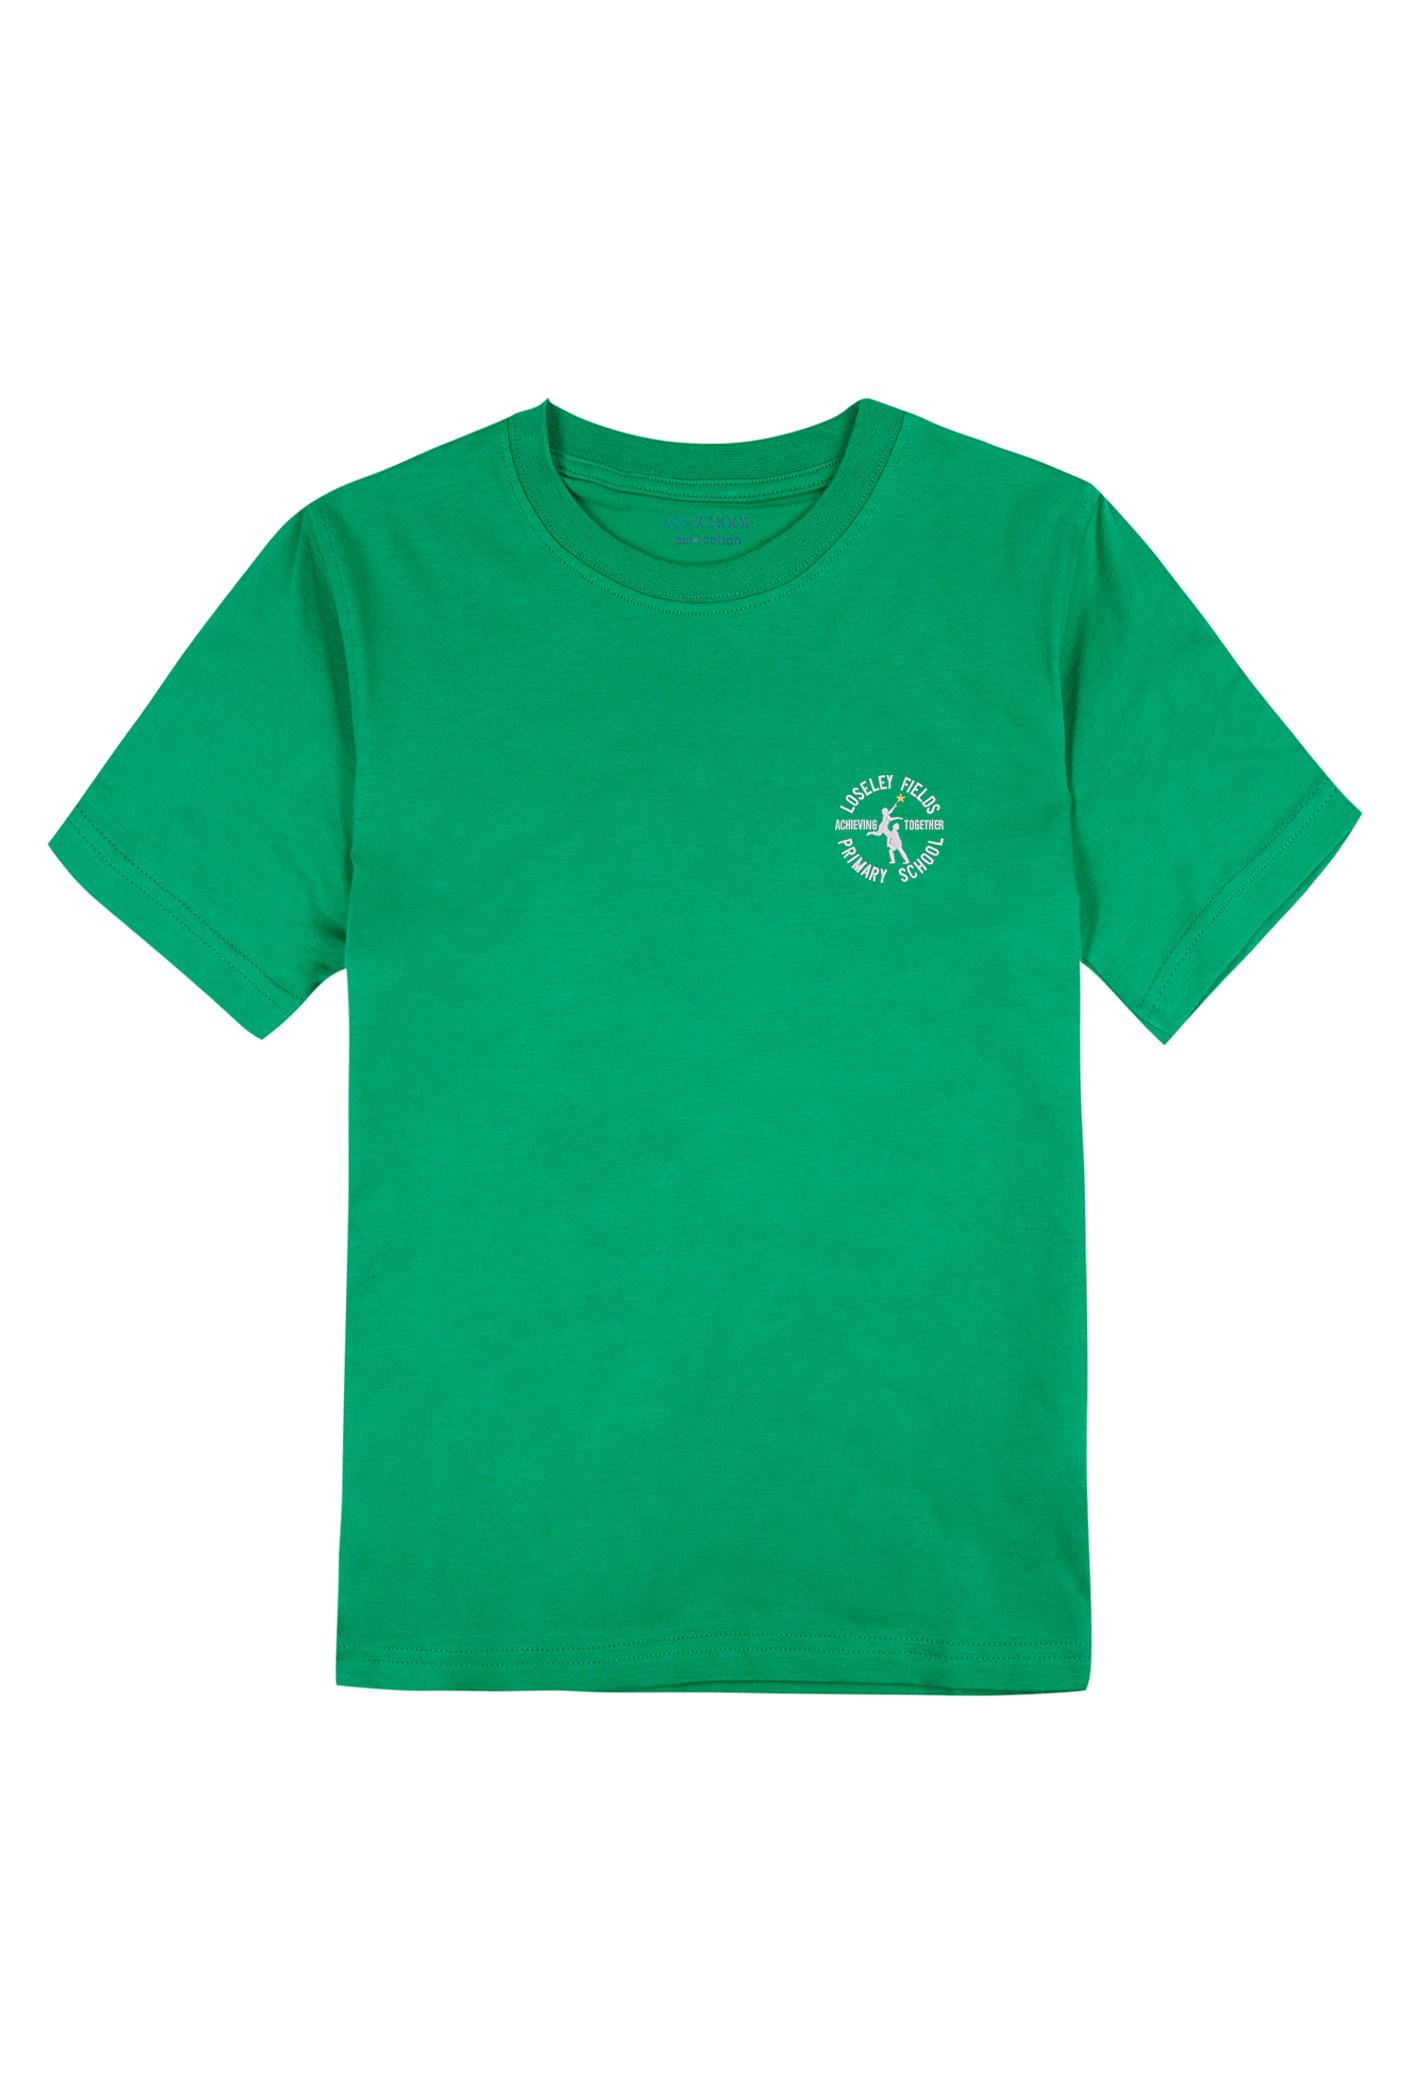 Loseley Fields Primary School Embroidered Emerald T-Shirt